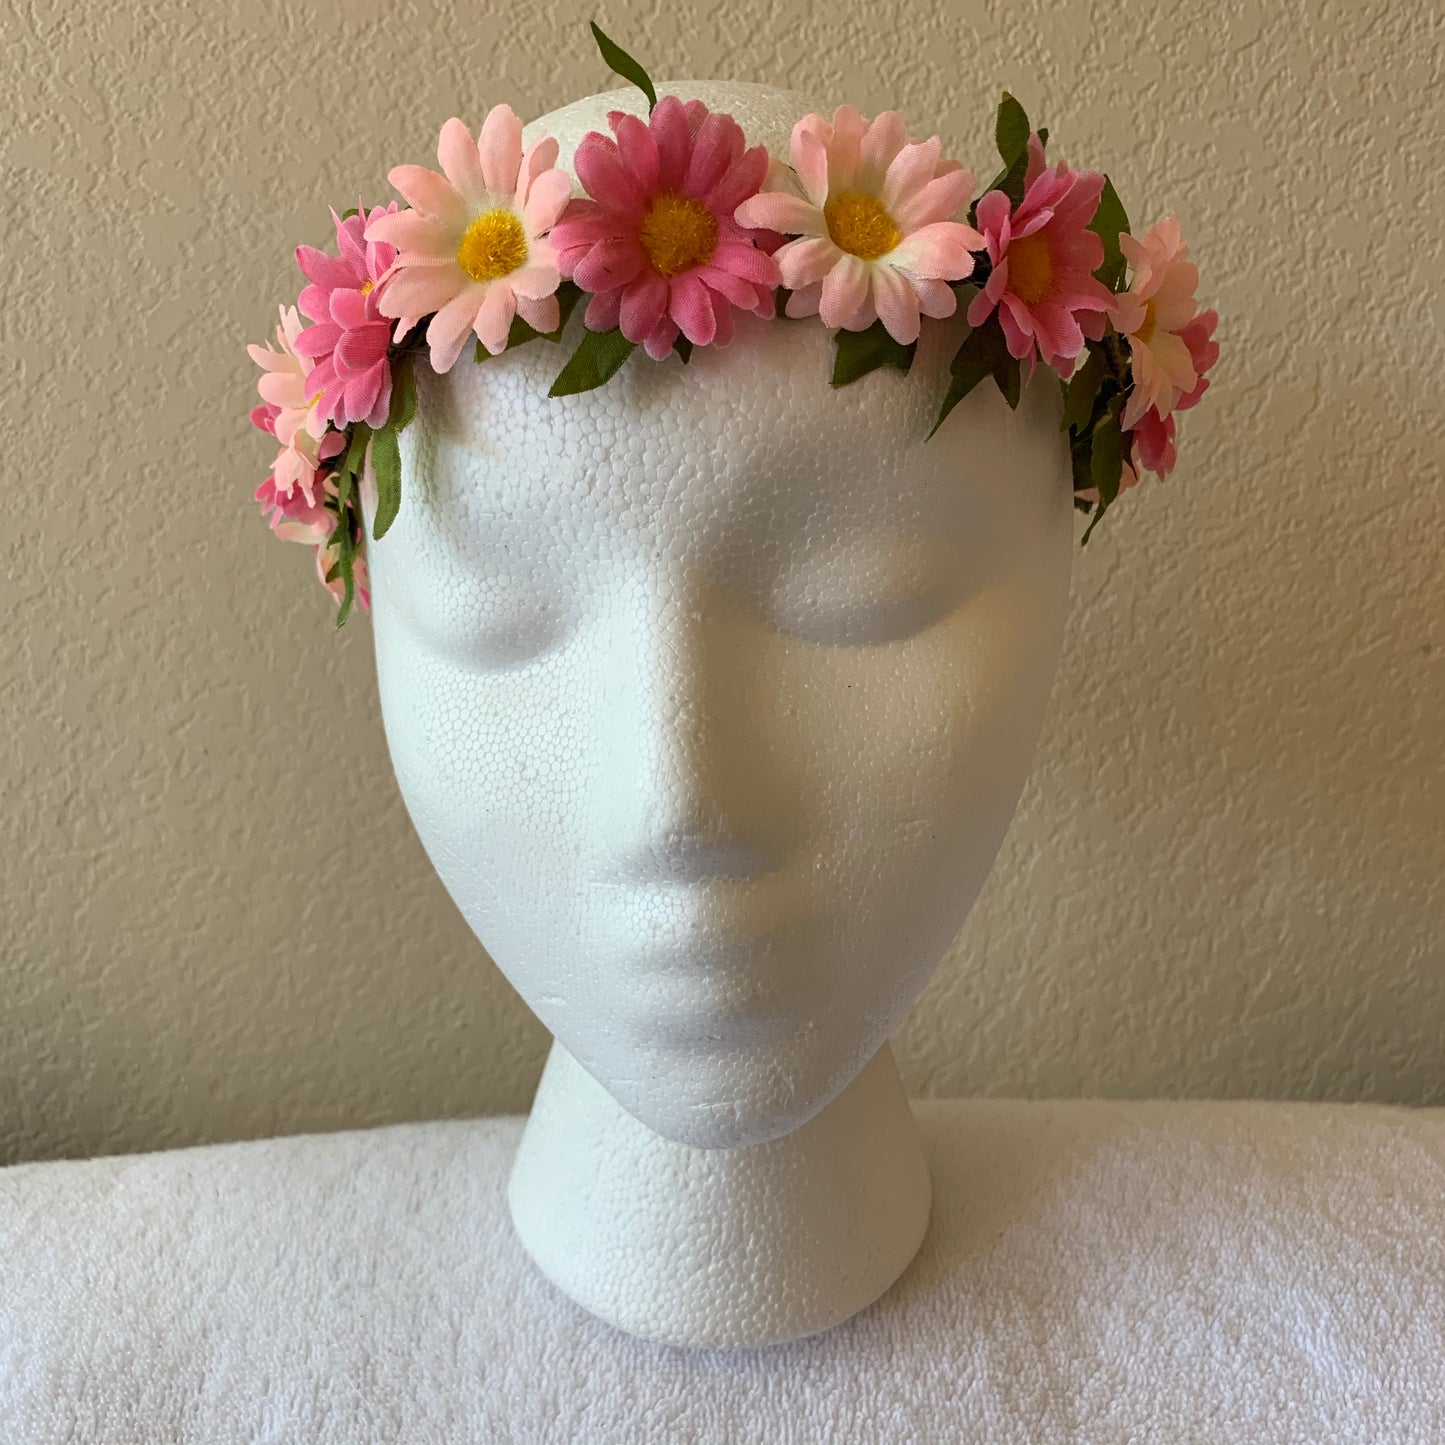 Extra Small Wreath - Light Pink and Pale Pink Daisies